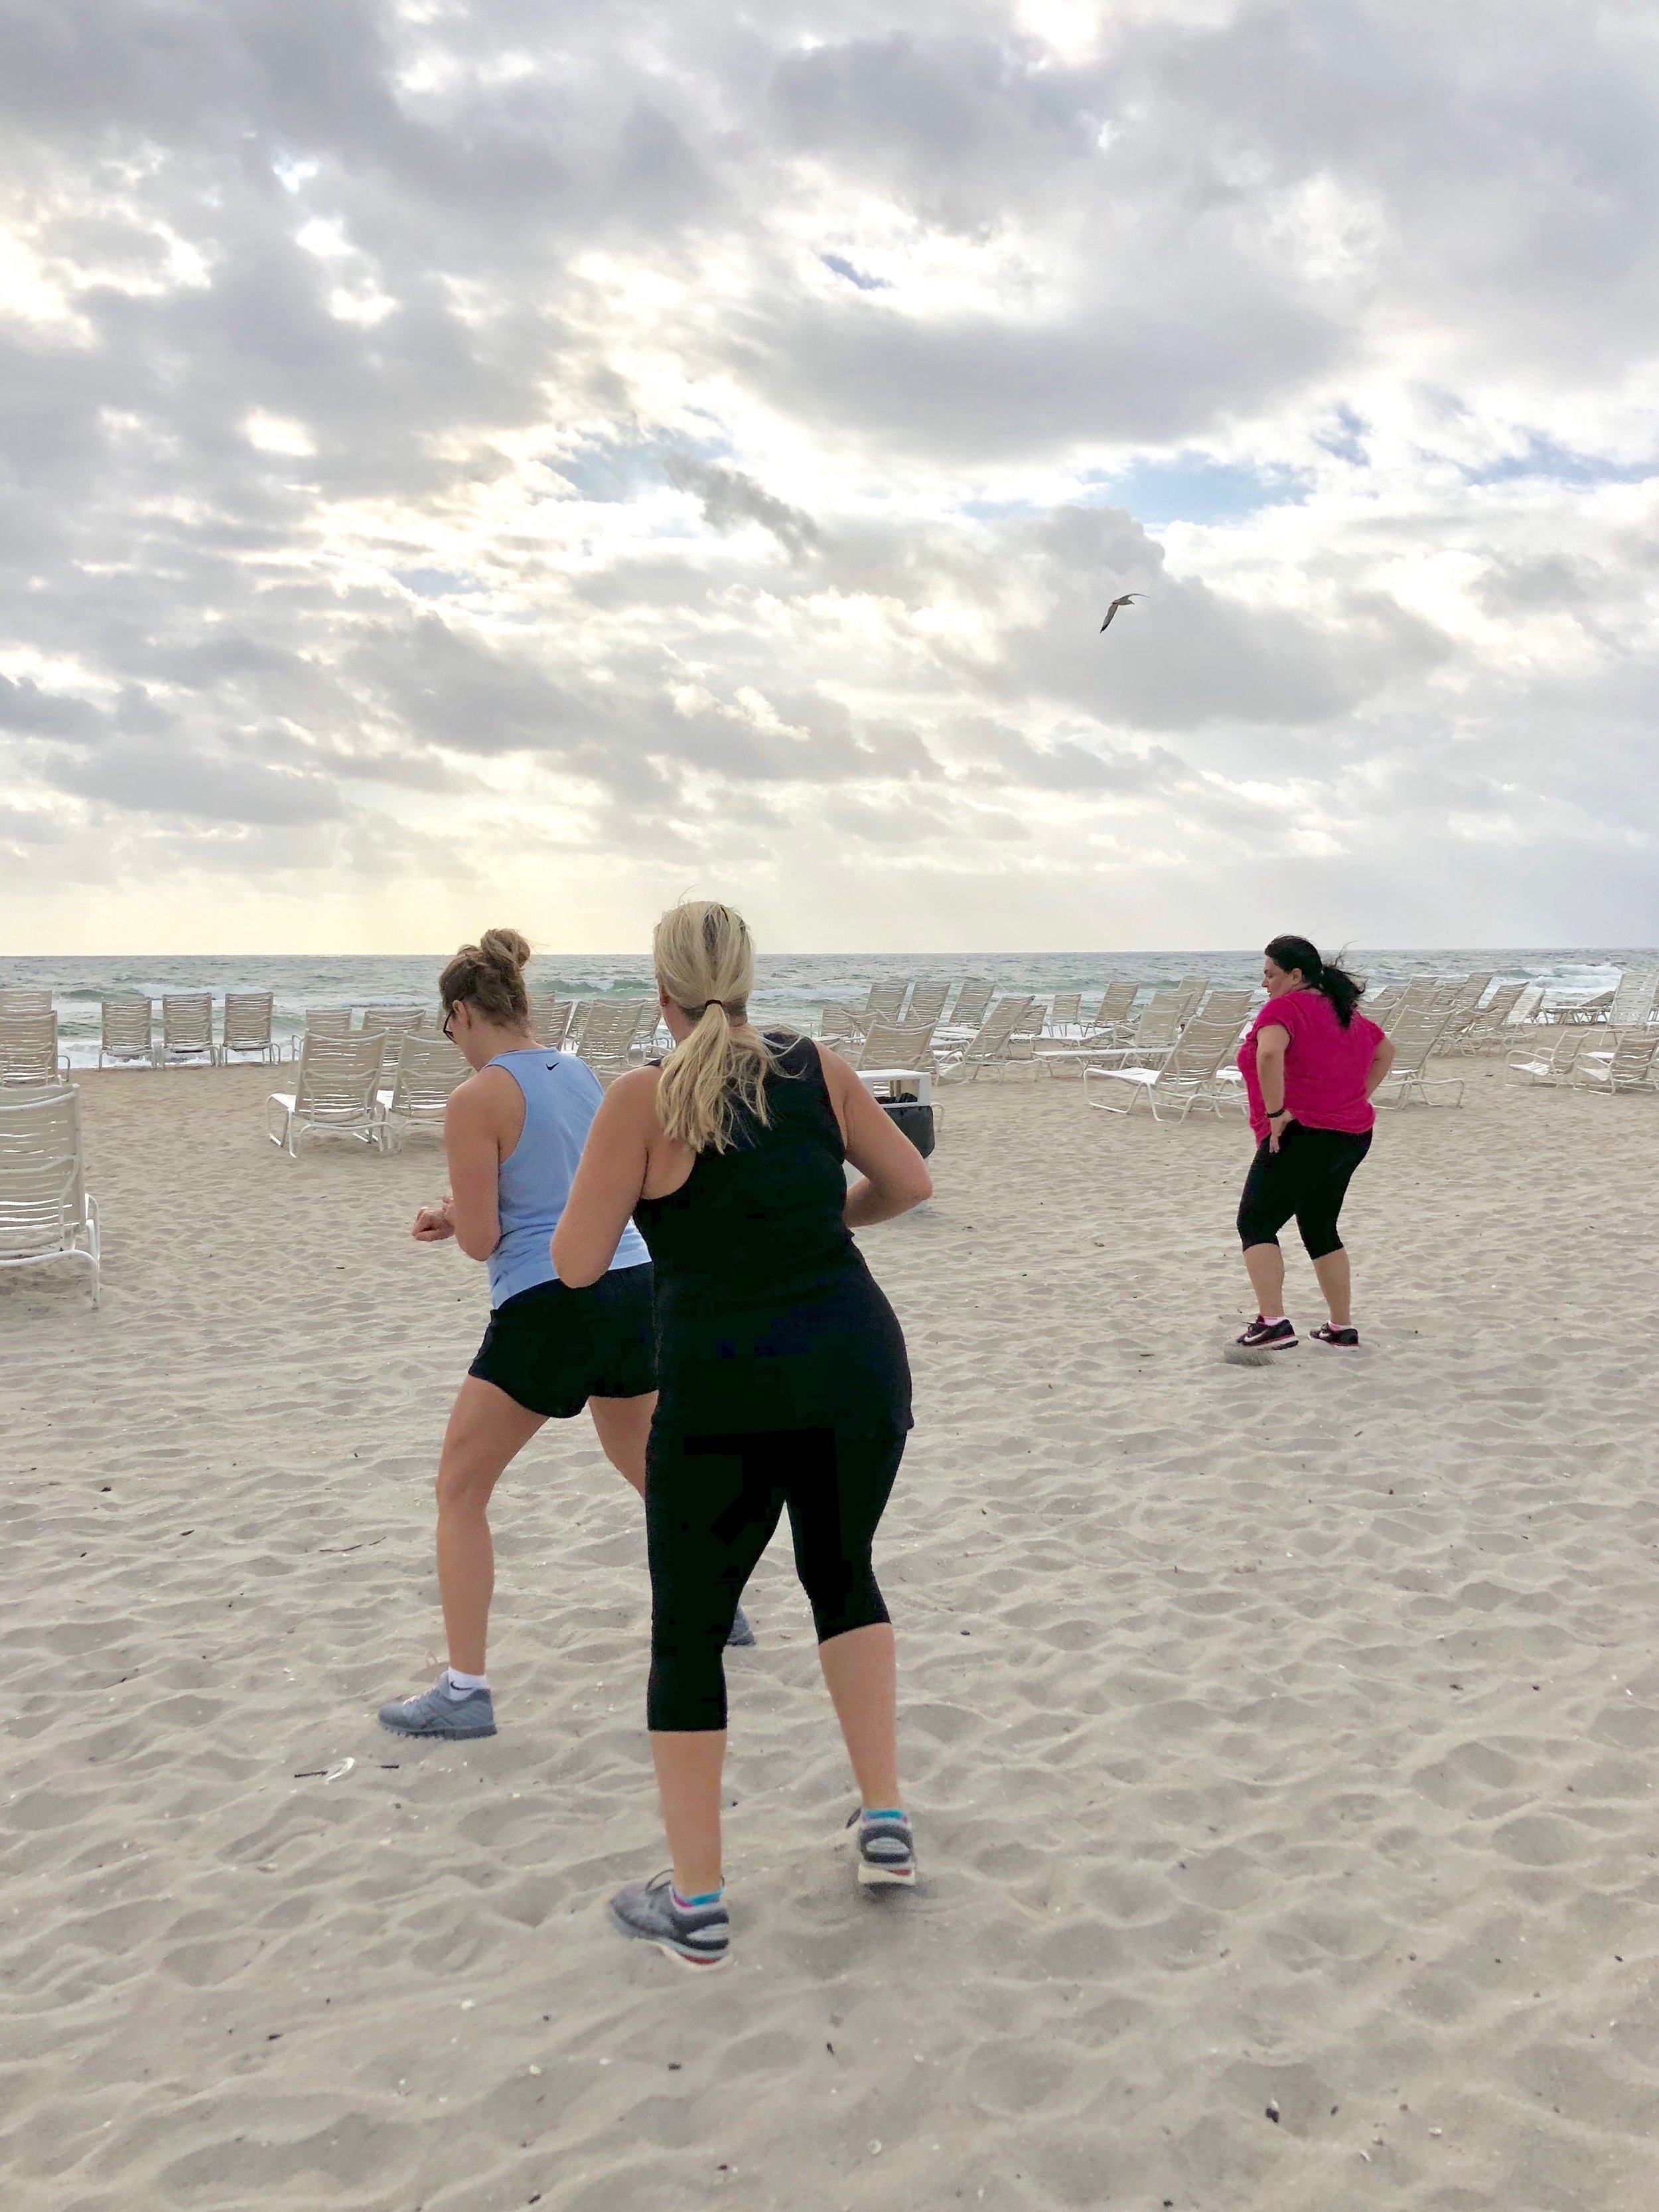 Guests enjoy another workout on the beach.